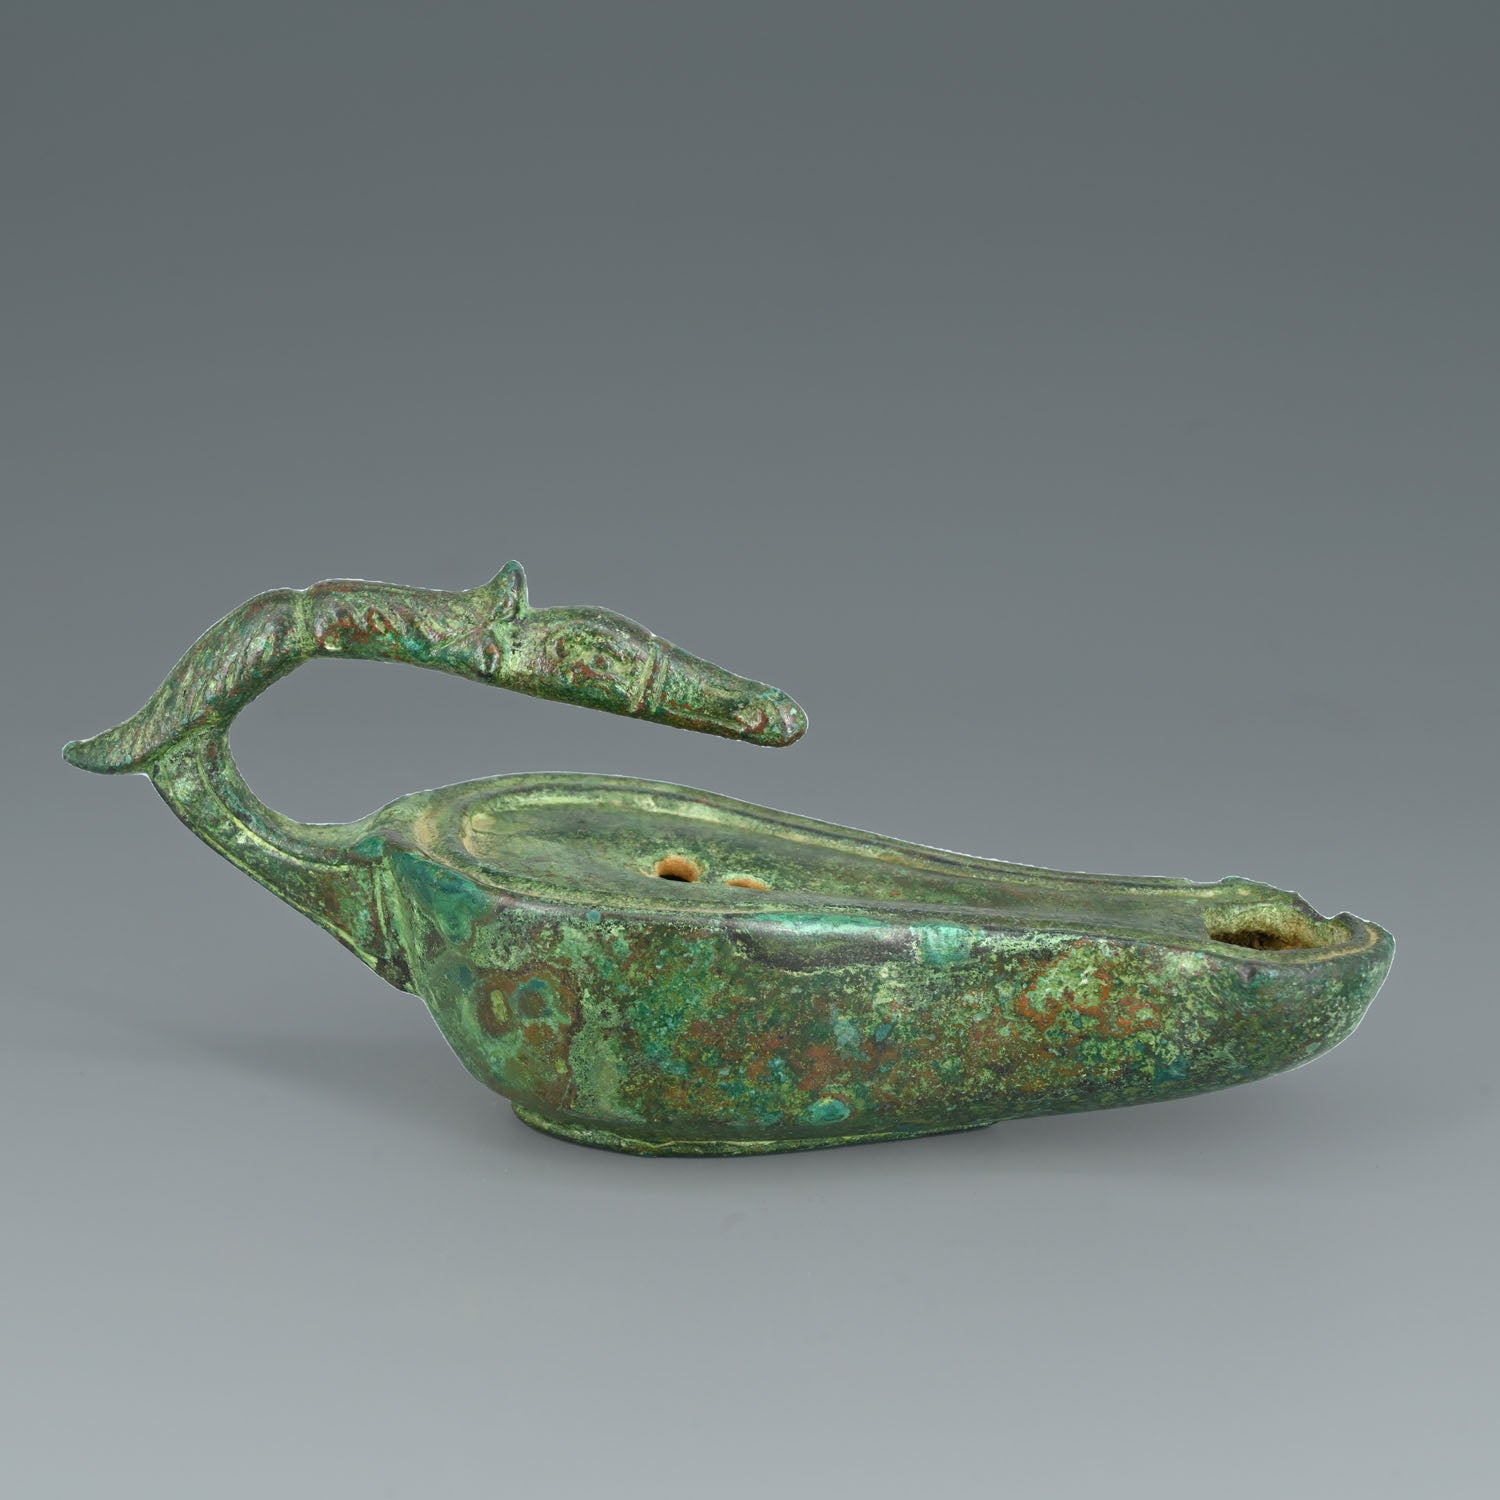 A Roman Bronze Oil Lamp with Duck Head, Roman Imperial Period, ca. 2nd - 3rd century CE